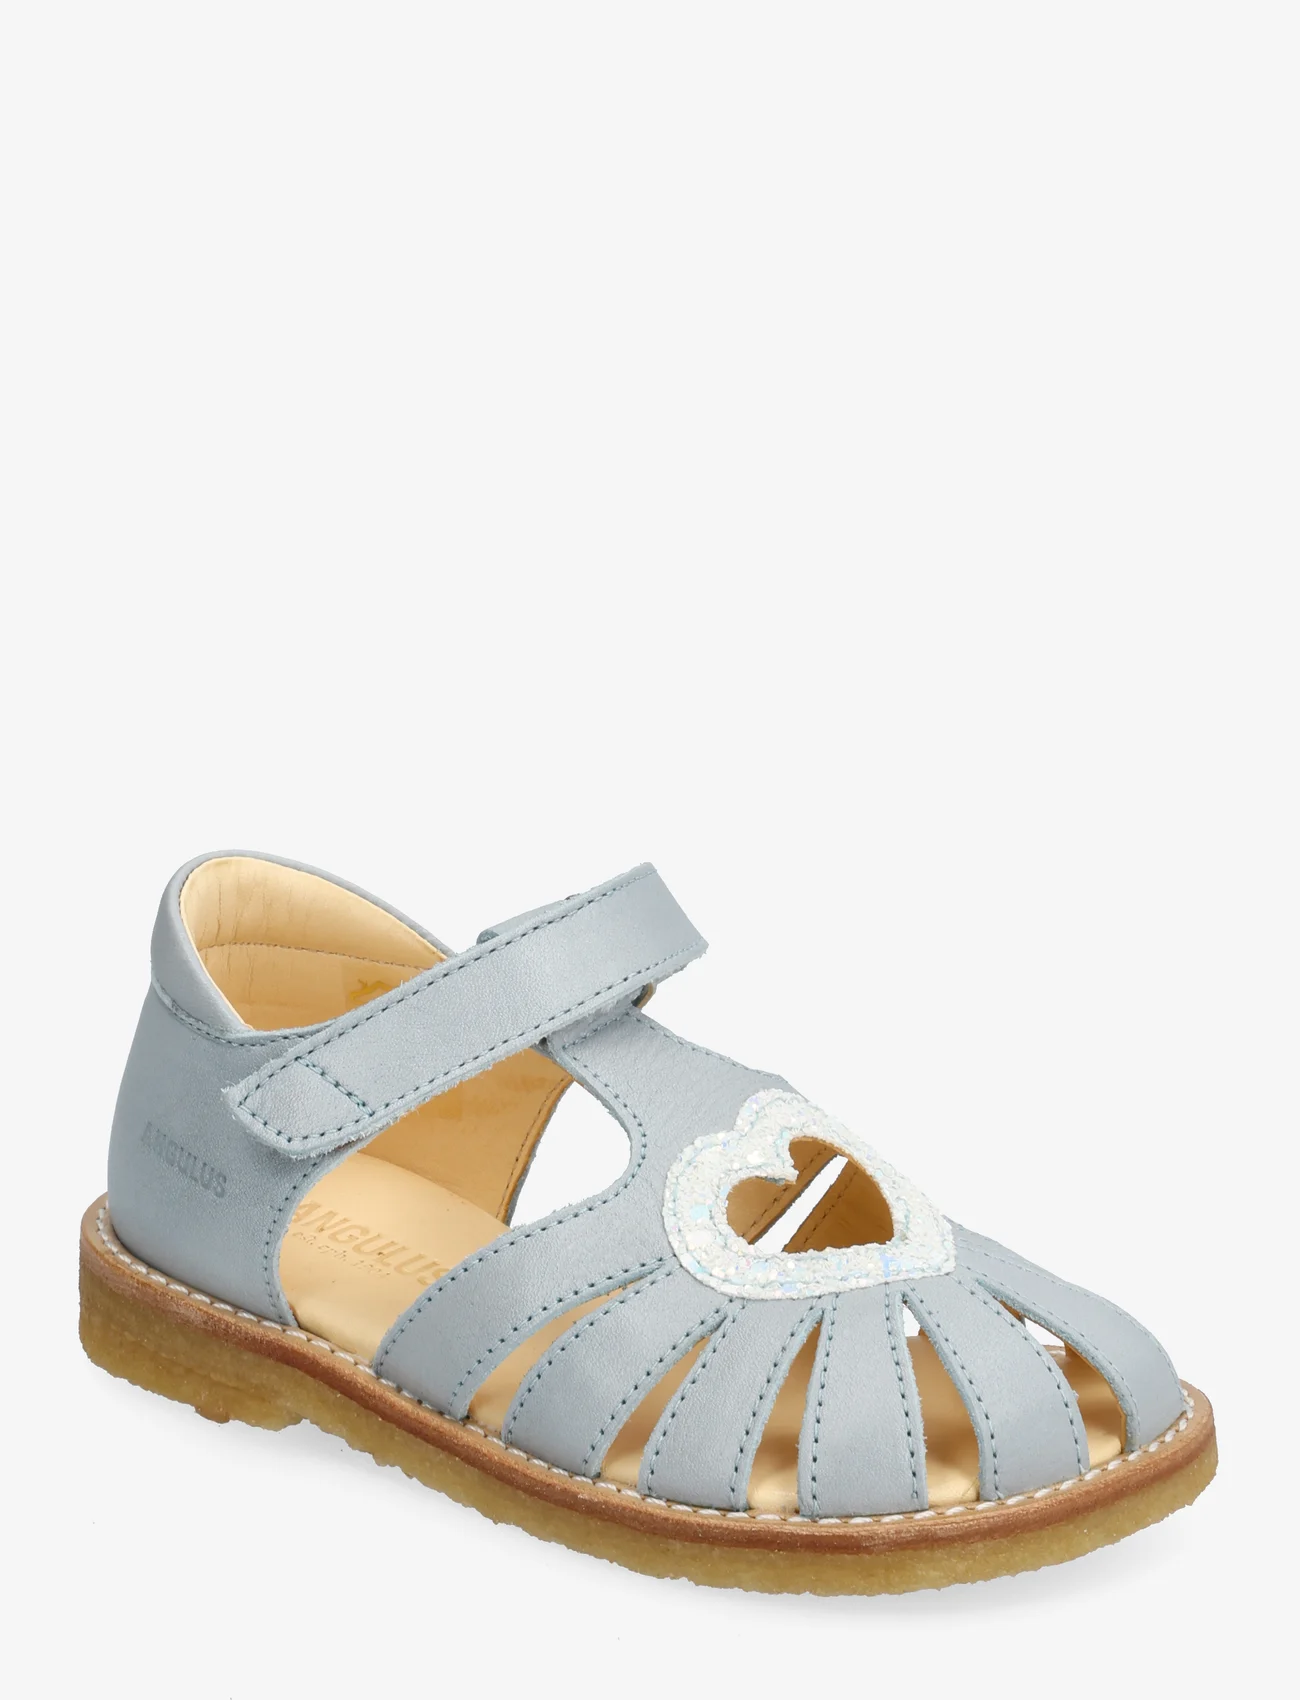 ANGULUS - Sandals - flat - closed toe - - sommerschnäppchen - 2712/2751 ice blue/ice glitter - 0